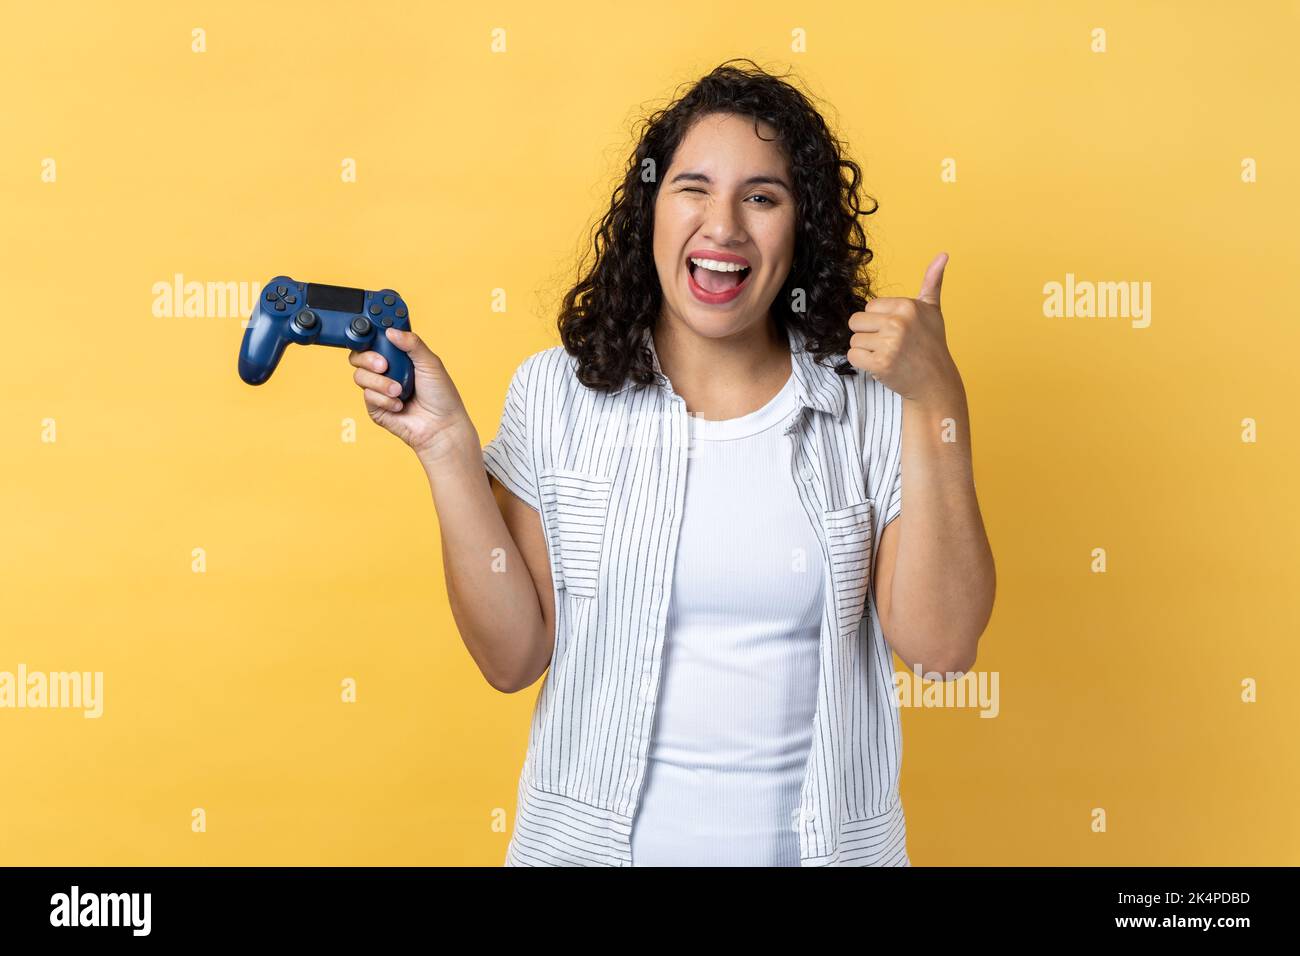 Portrait of joyful beautiful woman with dark wavy hair holding joystick in hands and showing thumb up, likes playing games on joypad. Indoor studio shot isolated on yellow background. Stock Photo